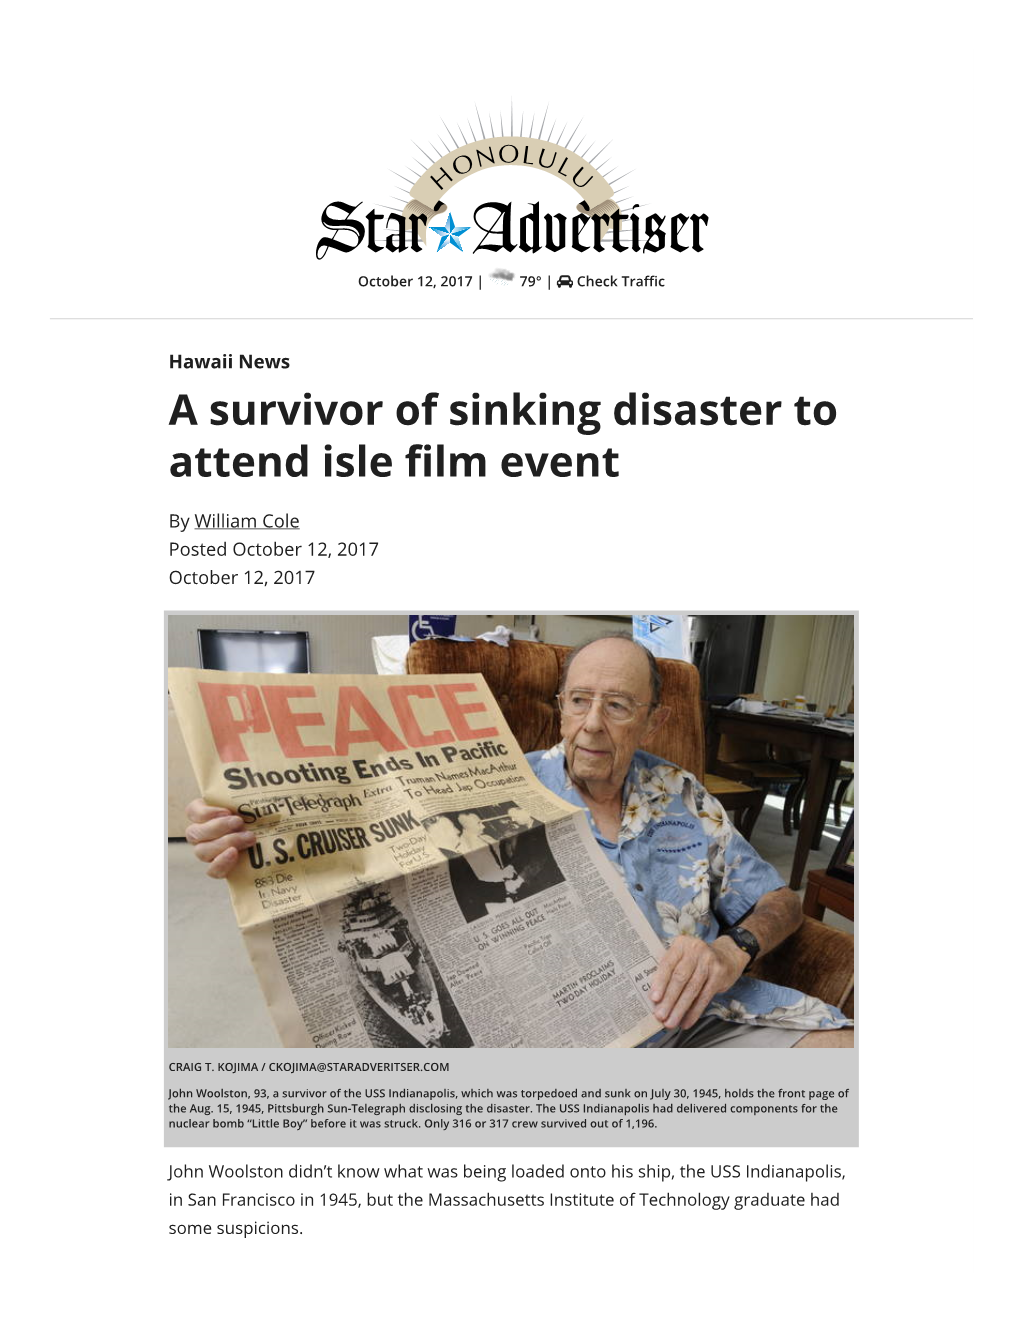 A Survivor of Sinking Disaster to Attend Isle Lm Event